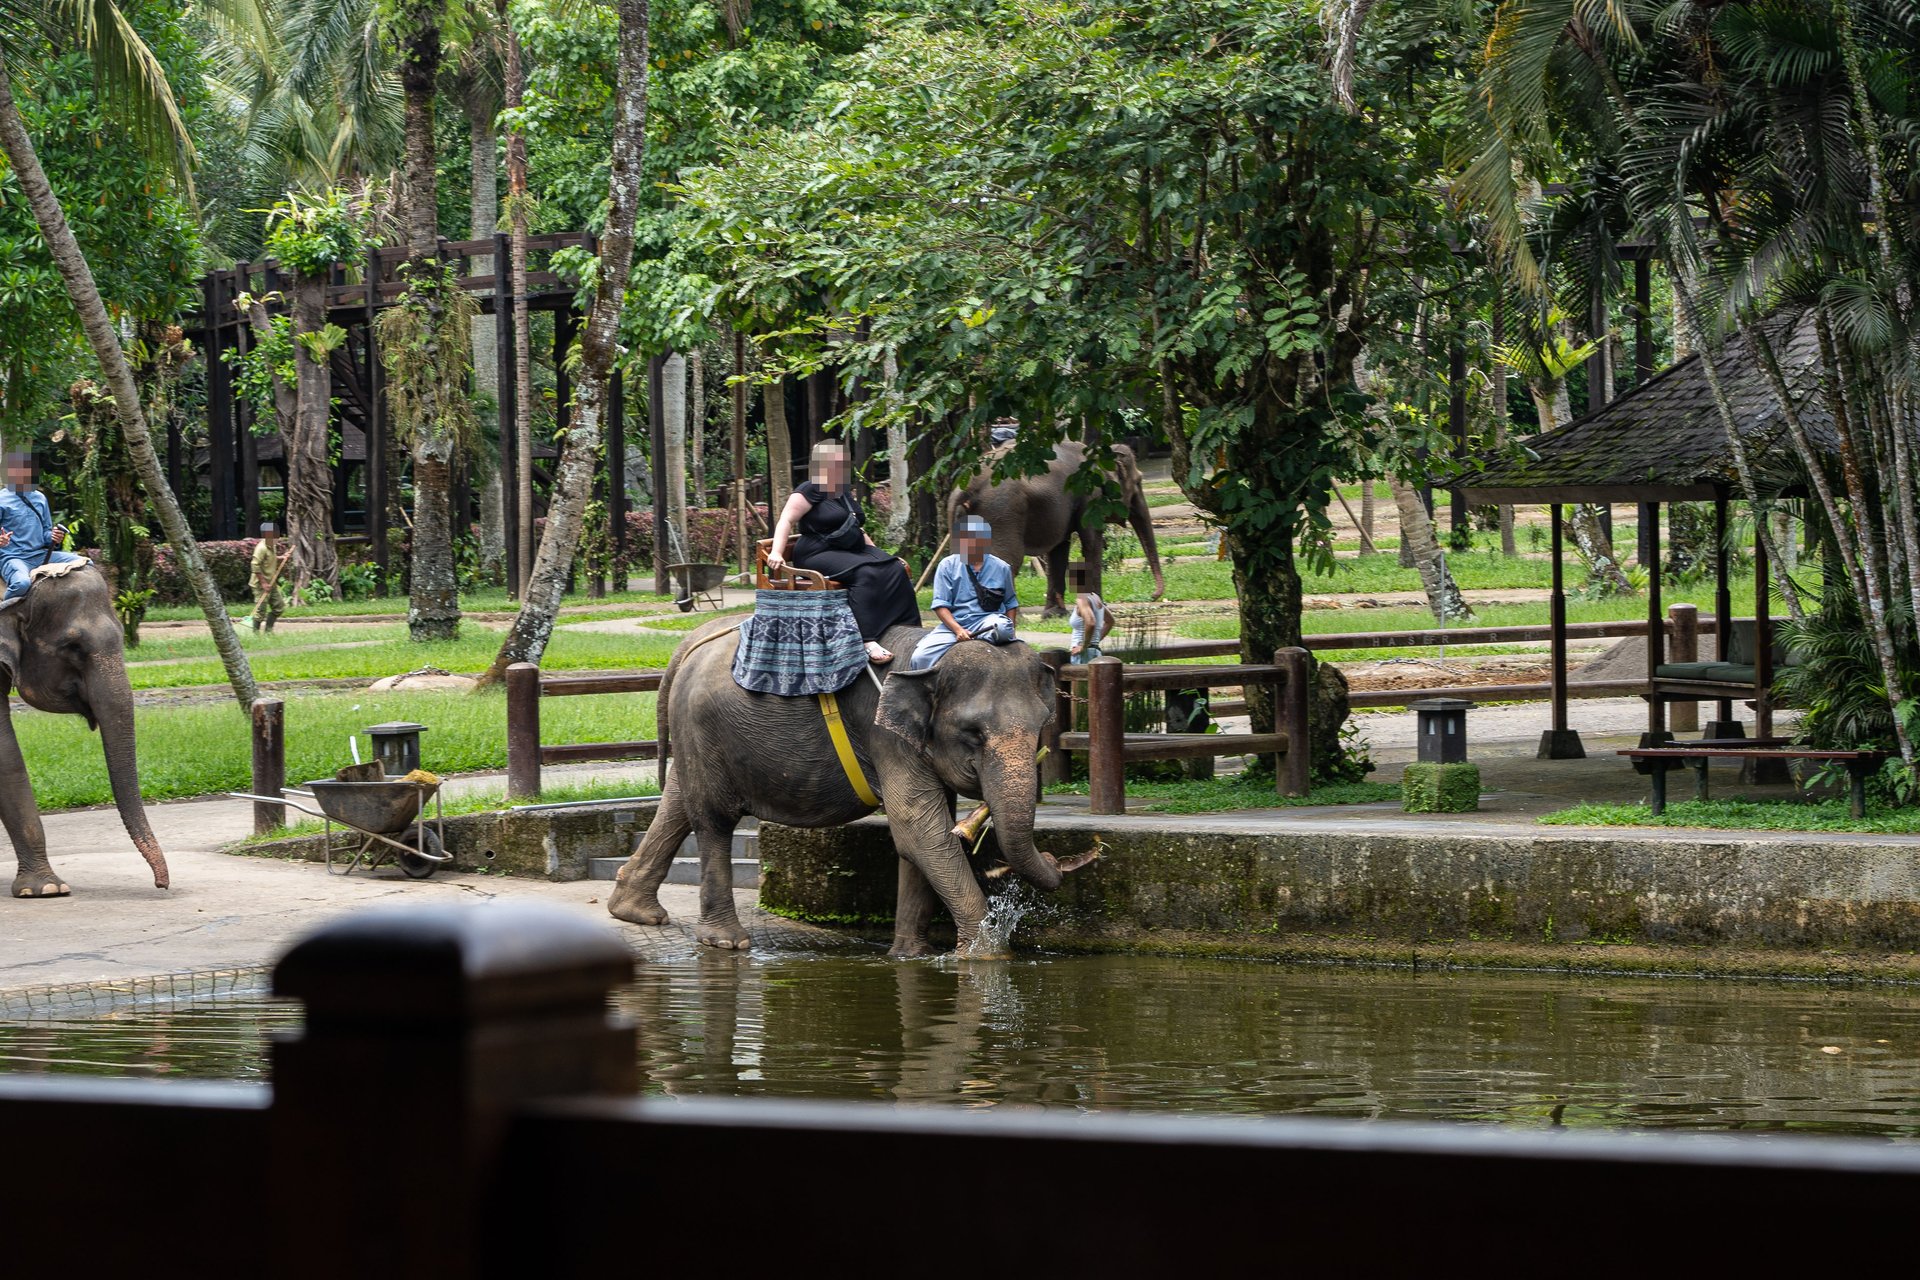 A tourist riding an elephant that is wading through water